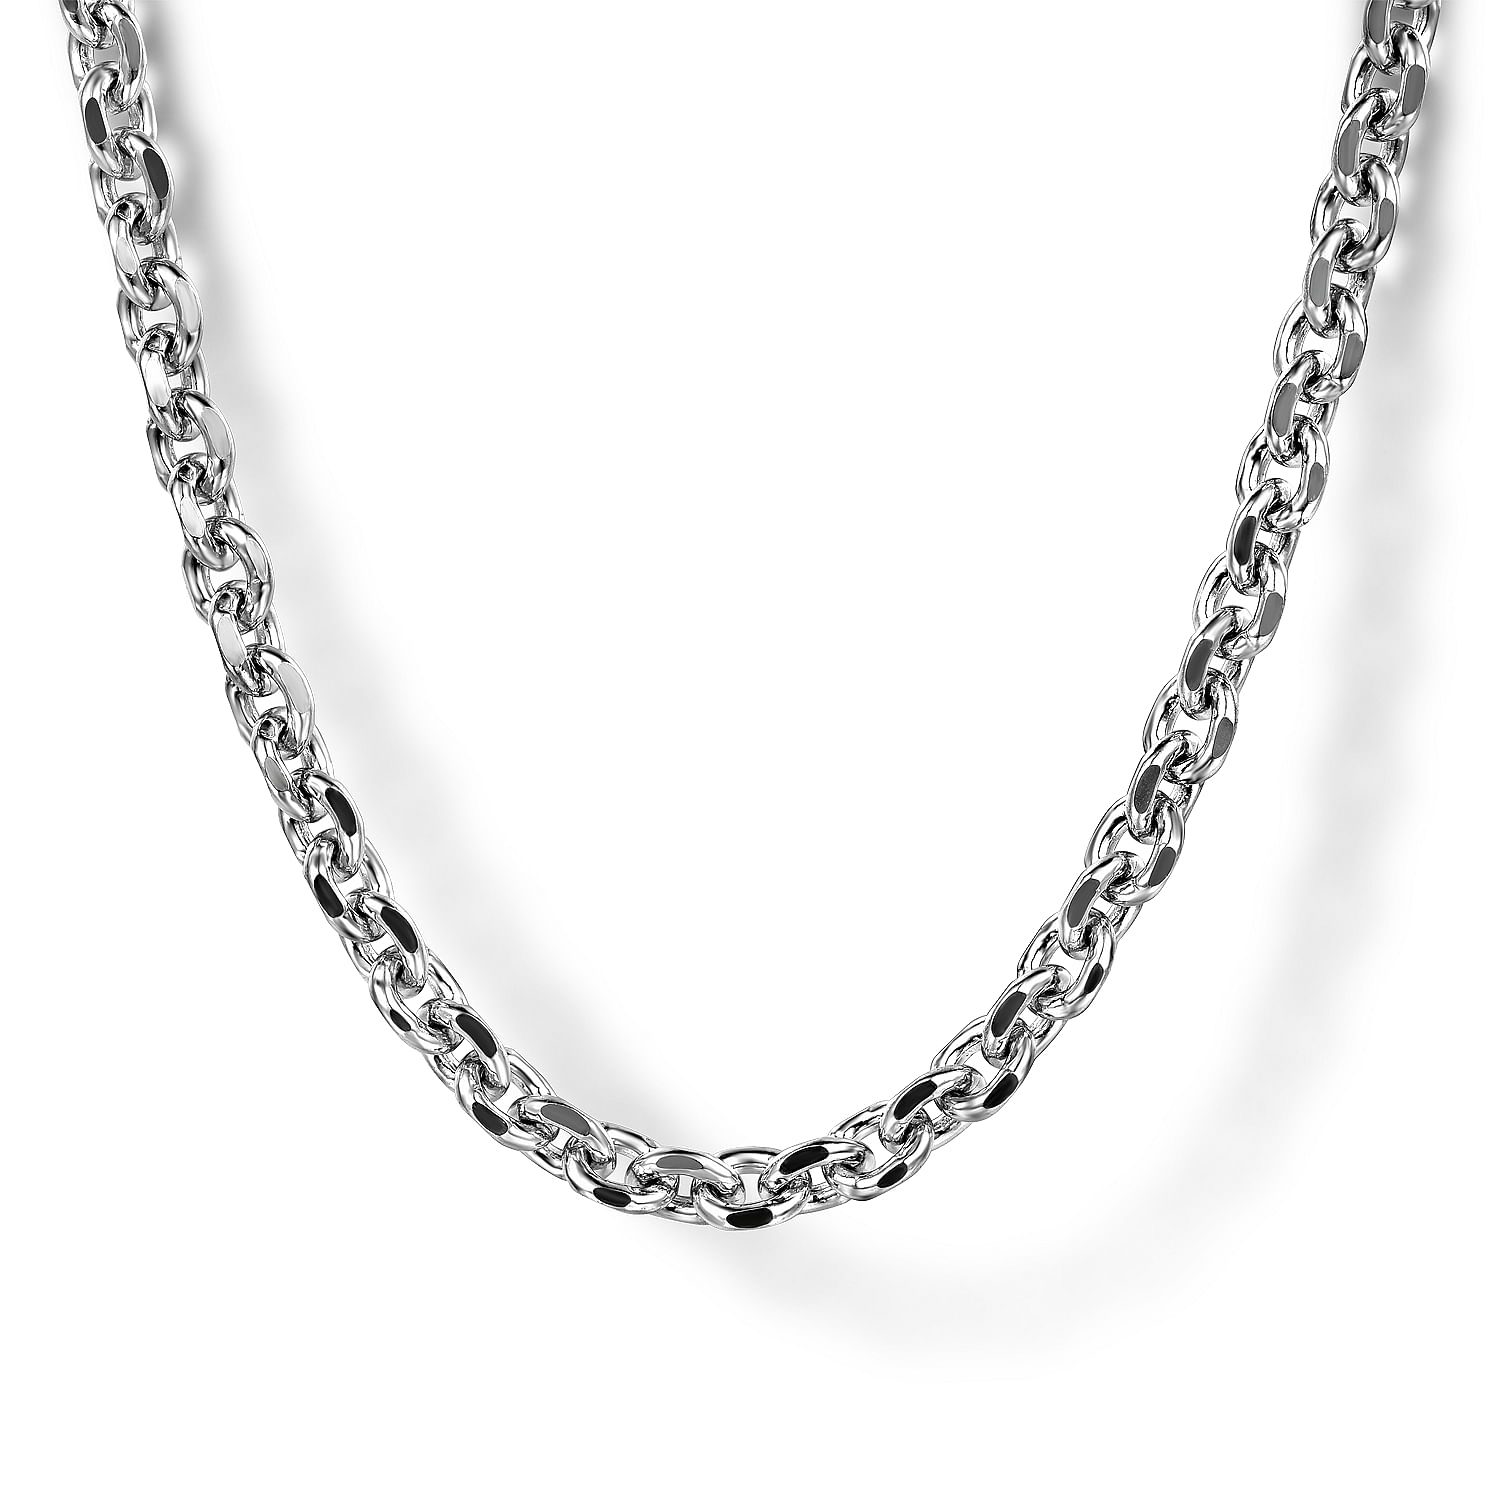 20 Inch 925 Sterling Silver Men's Link Chain Necklace | NKM7010